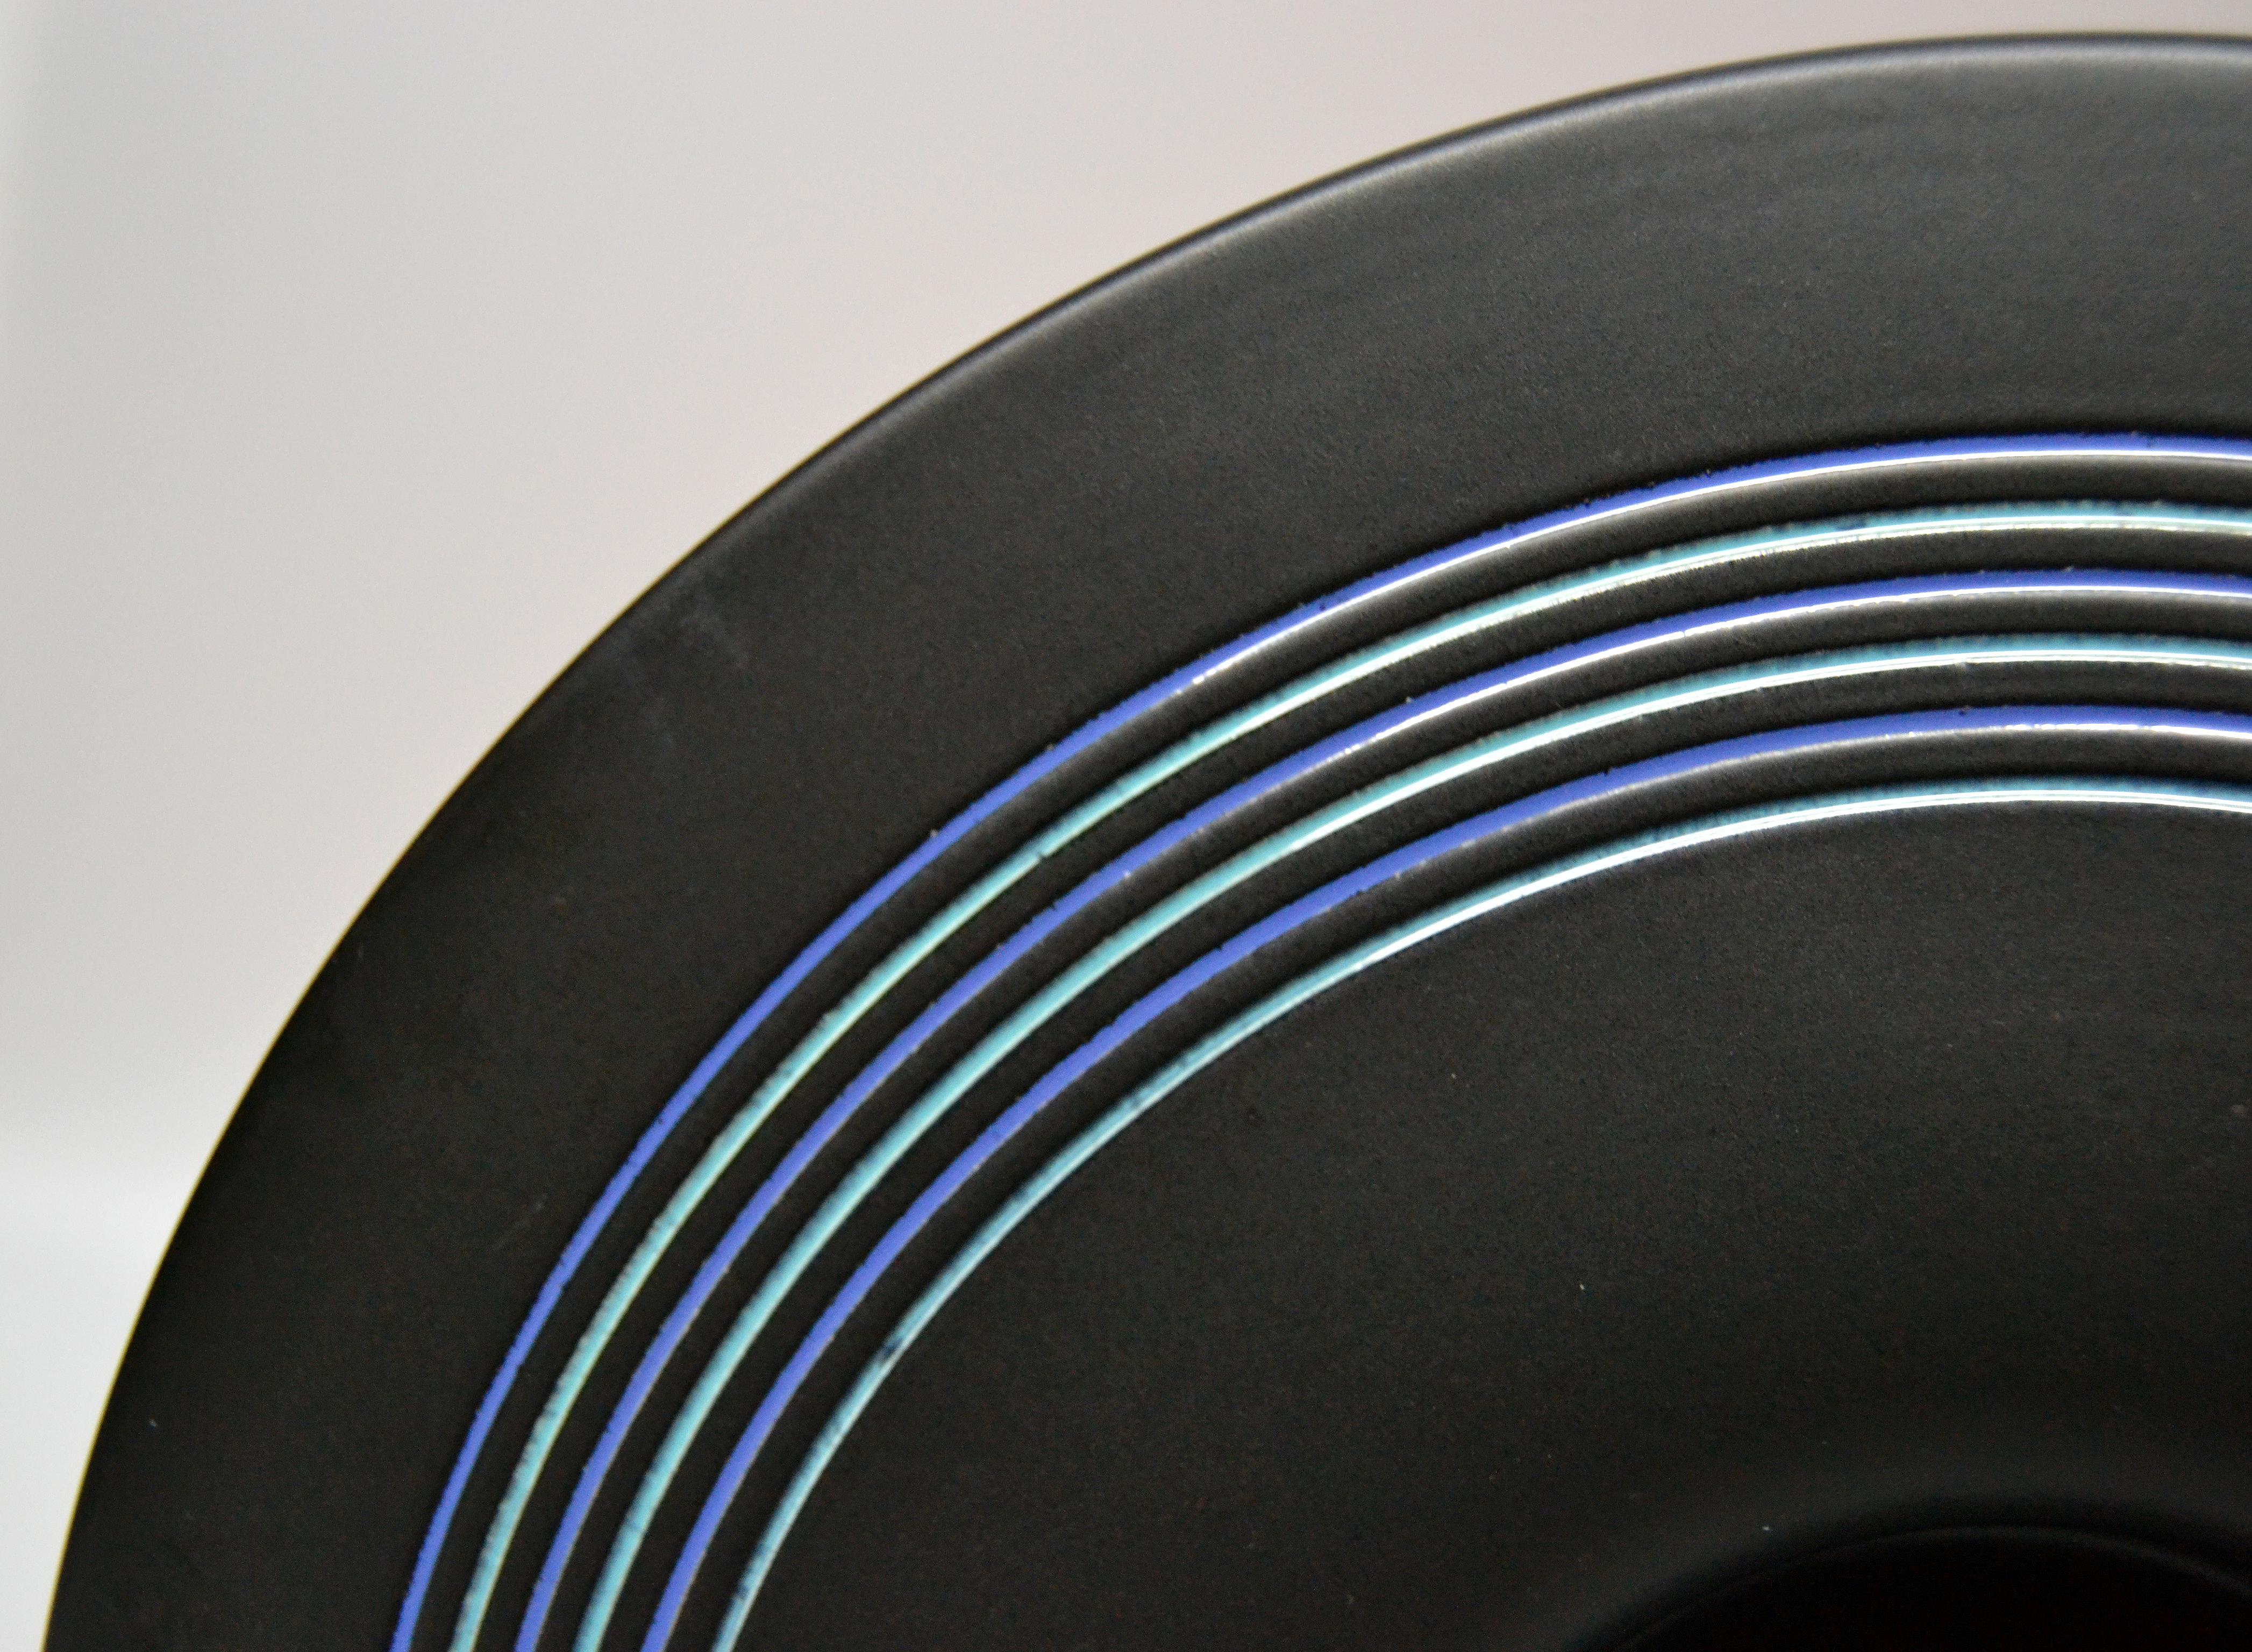 Mid-Century Modern Sicart Ceramic Plate, Centerpiece, Fruit Bowl in Black & Blue by Boccato, Italy